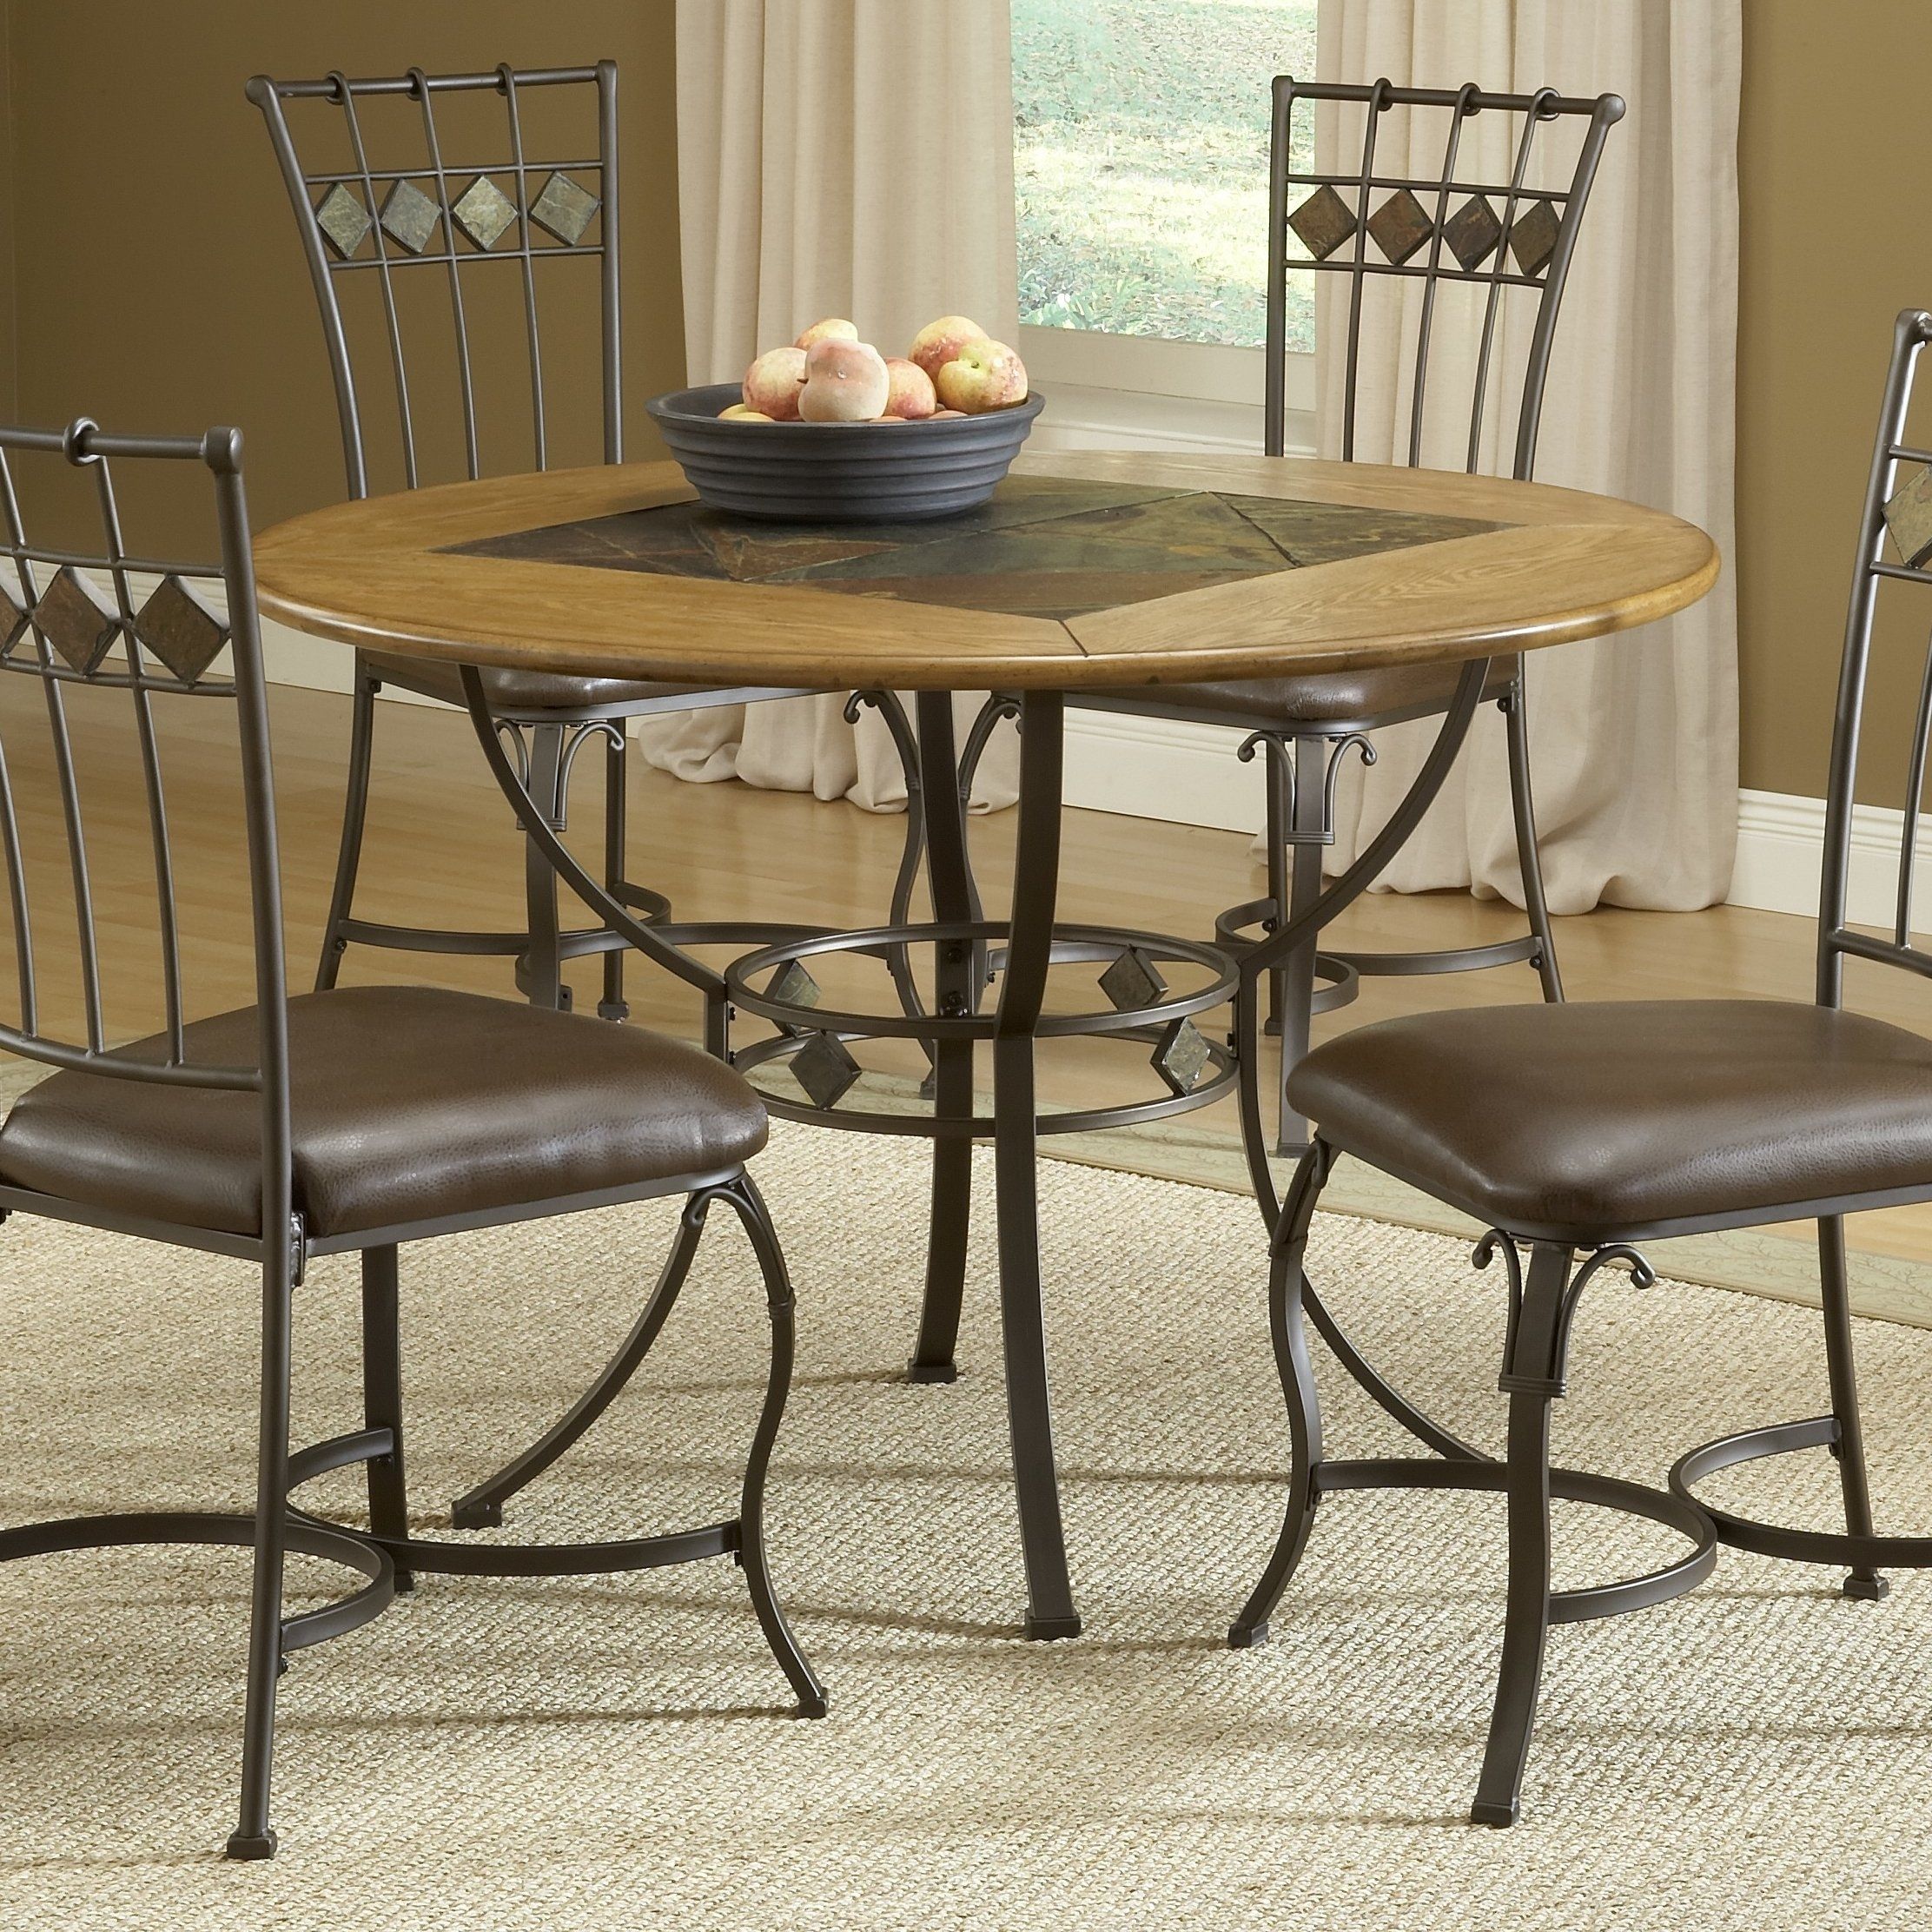 Red Barrel Studio Shiflett 5 Piece Dining Set & Reviews | Wayfair Intended For Most Recently Released Caira Black 5 Piece Round Dining Sets With Diamond Back Side Chairs (View 3 of 20)